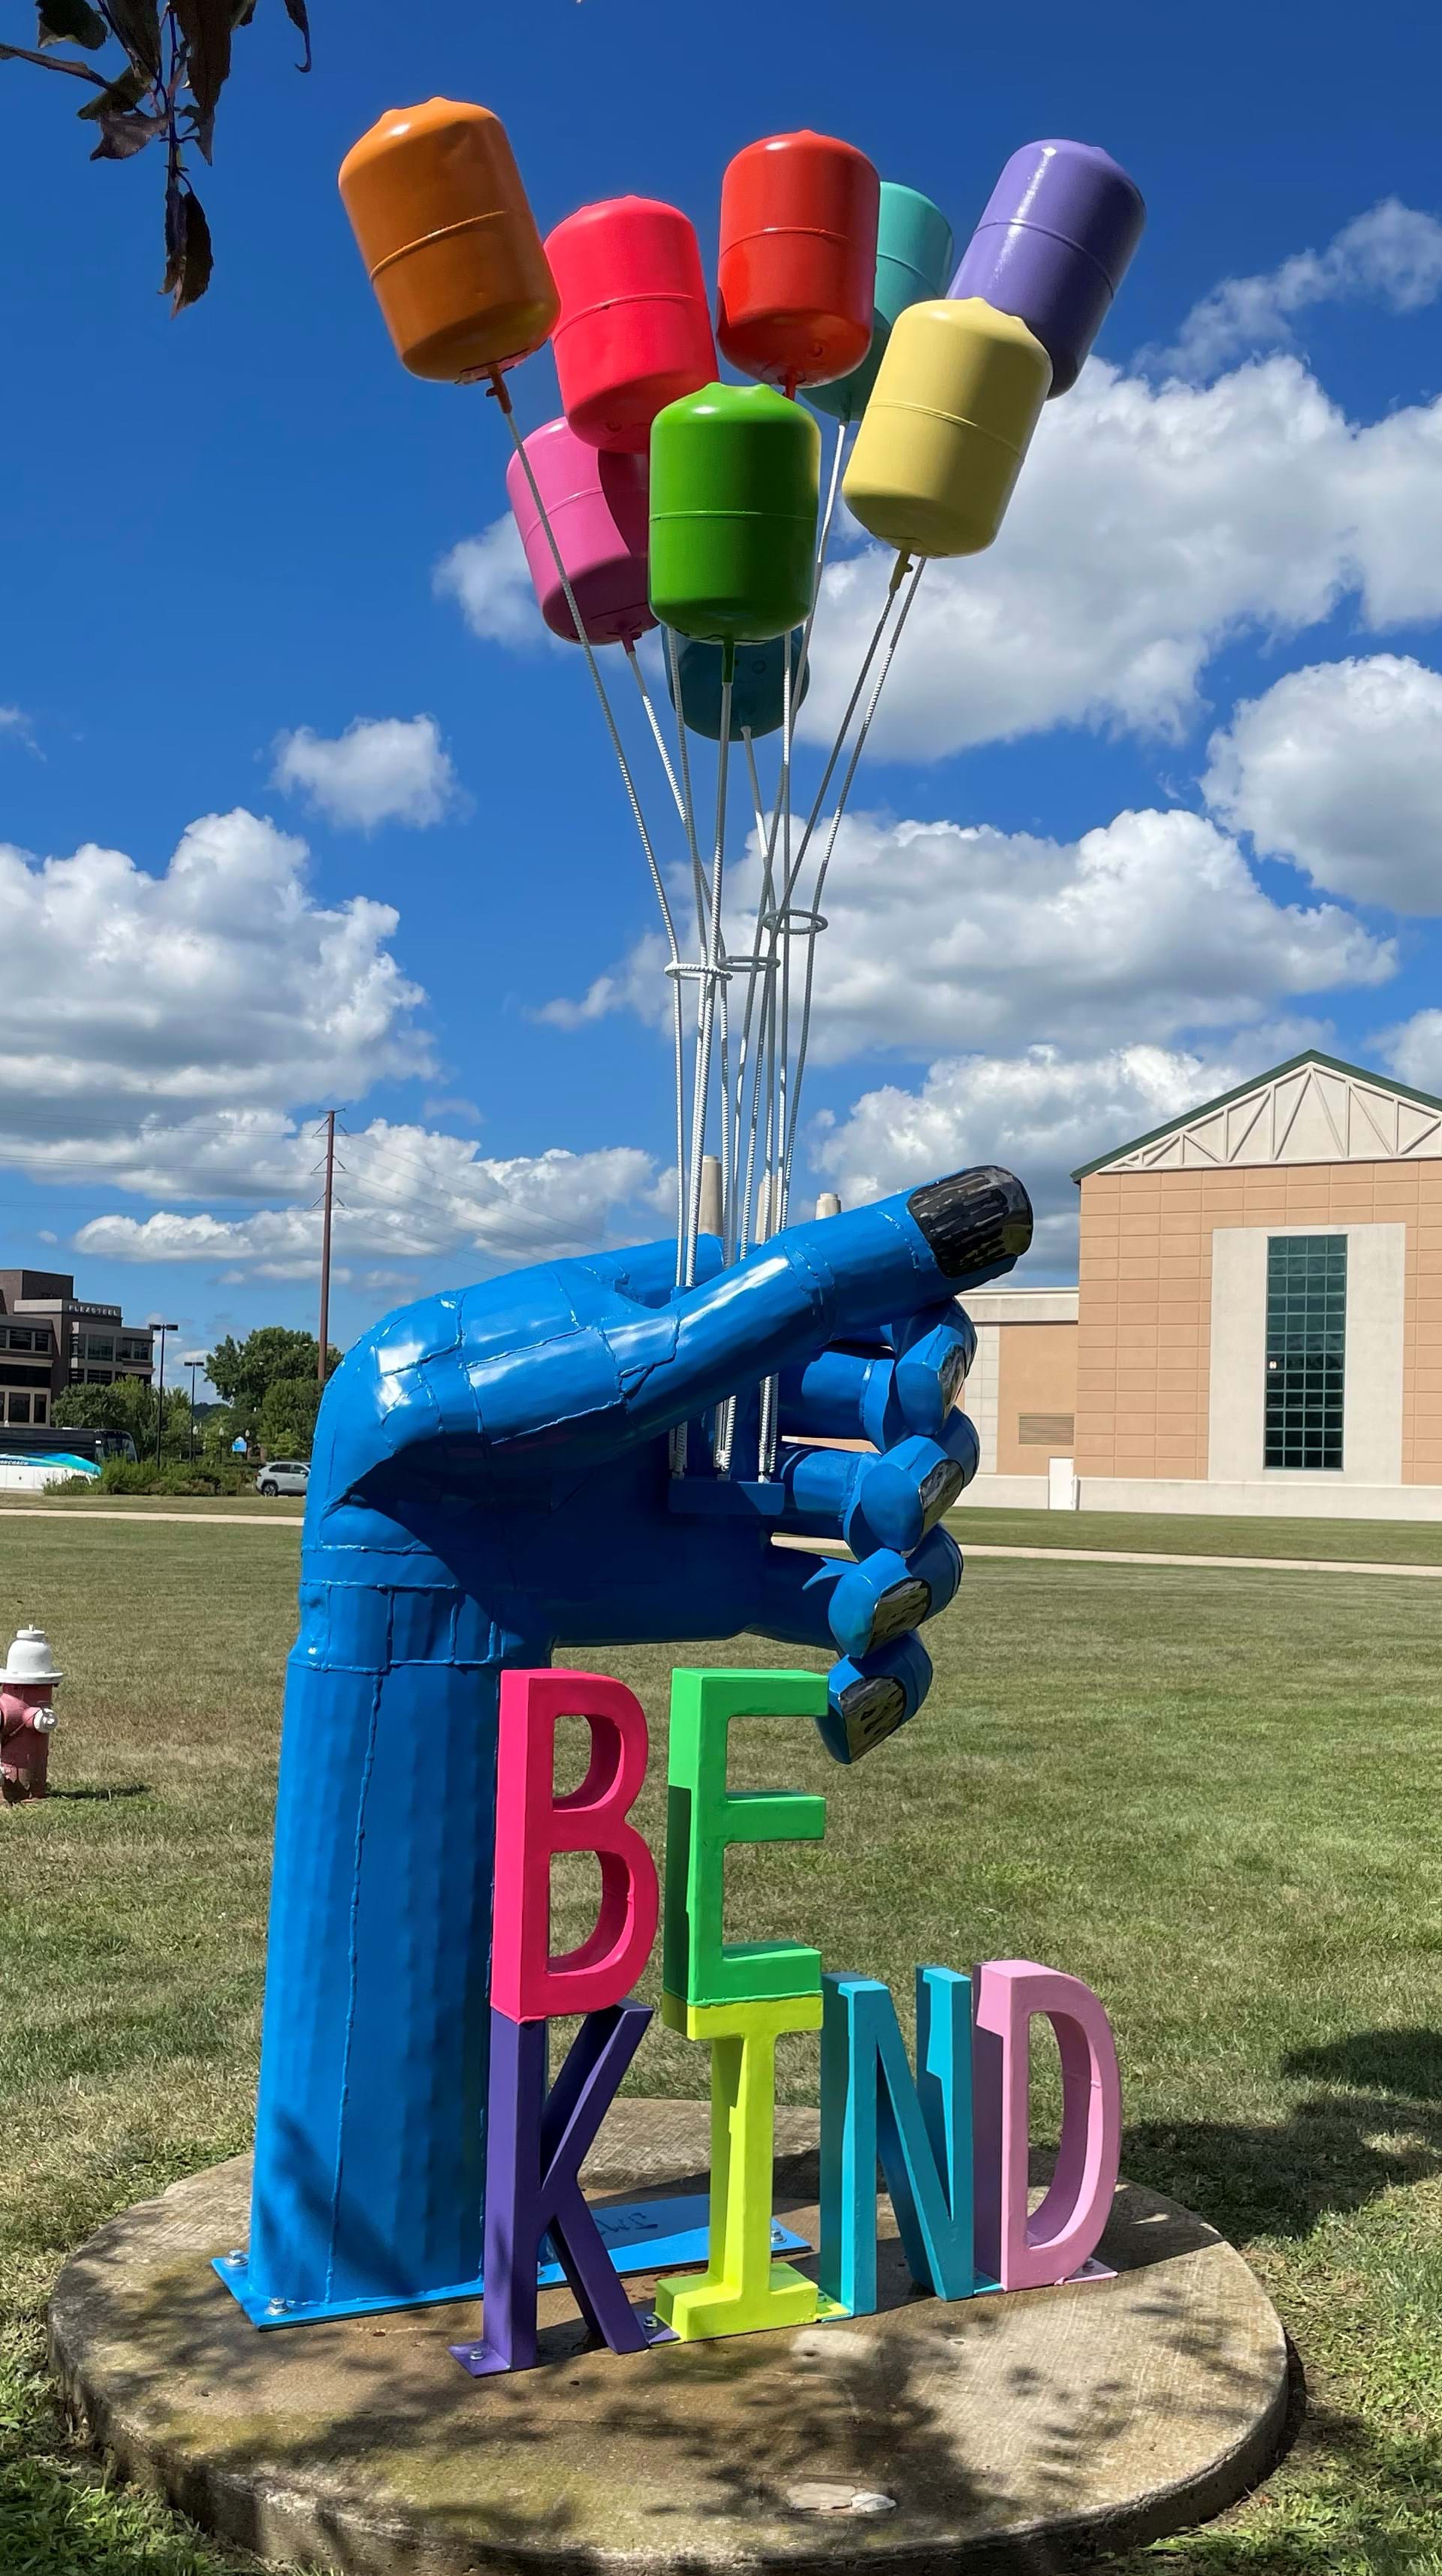 Be Kind by Joe & Terry Malesky of Stratford, MO. On display through end of July 2023 along the Mississippi Riverwalk in the Port of Dubuque.